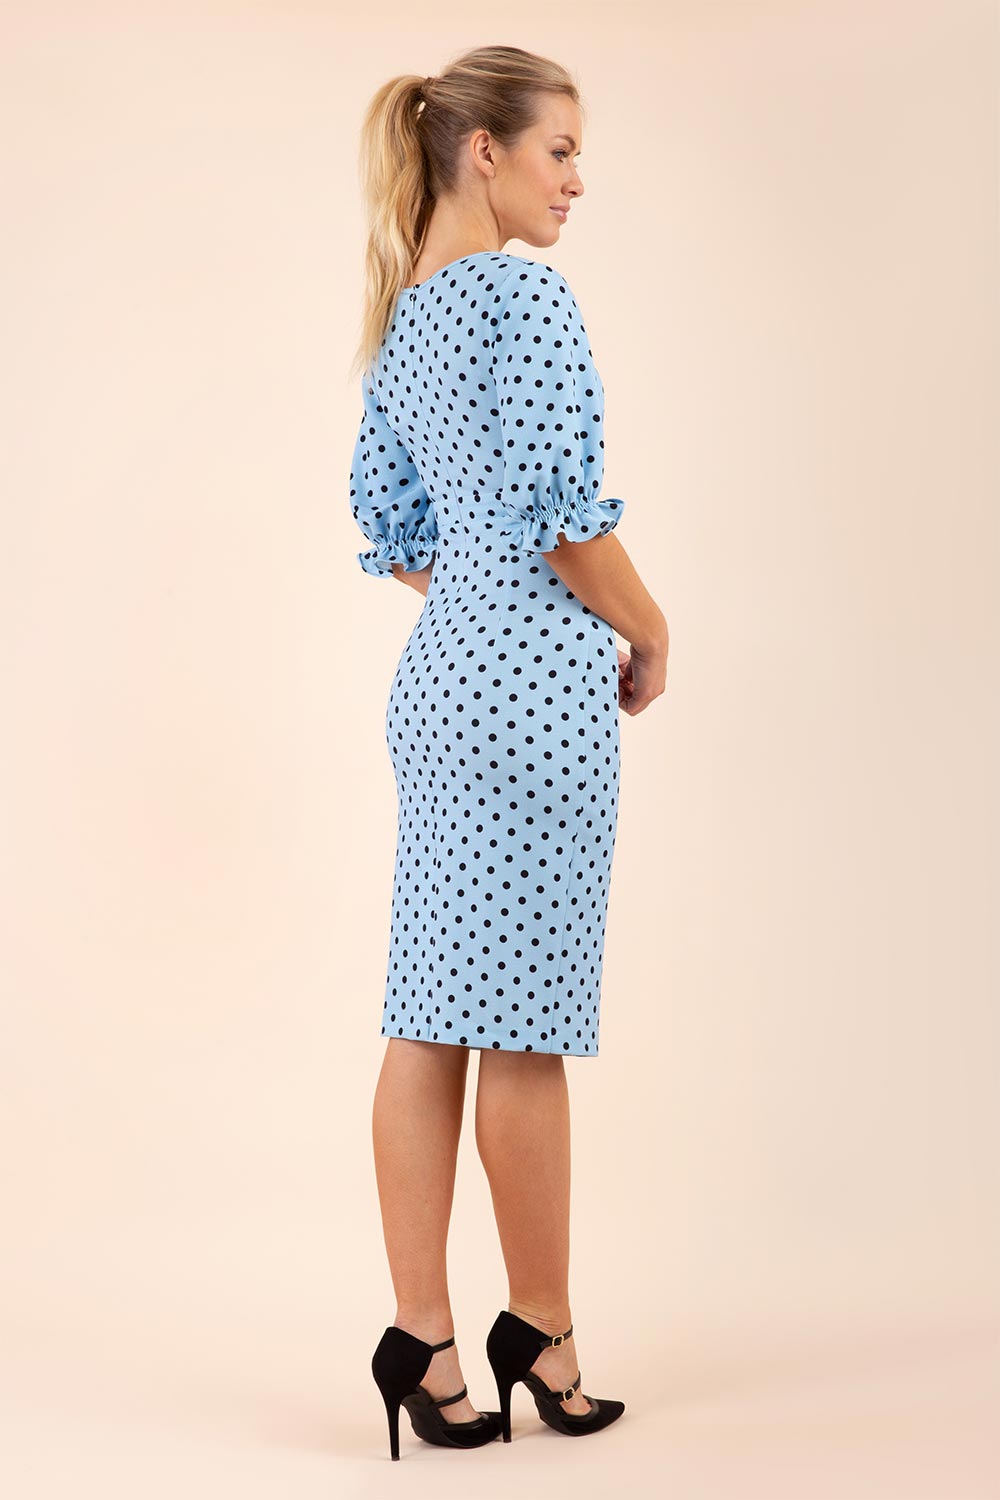 Blonde model wearing Diva Catwalk Palacio Pencil dress v neckline and pleating across the tummy with puffed short sleeves in blue polka dot back